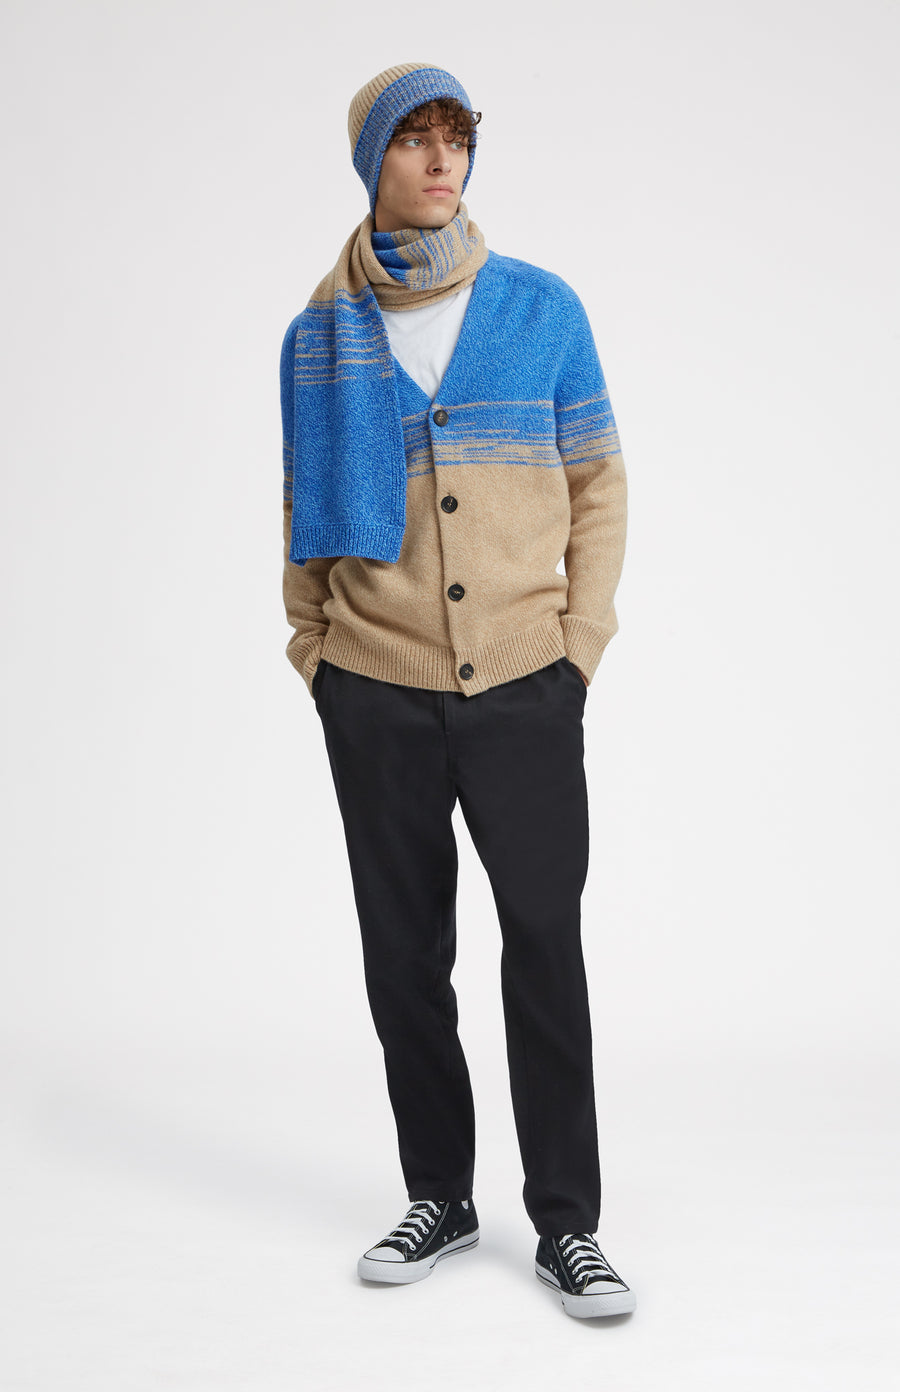 Lambswool V Neck Cardigan in Cobalt and Camel on model with match hat & scarf - Pringle of Scotland 